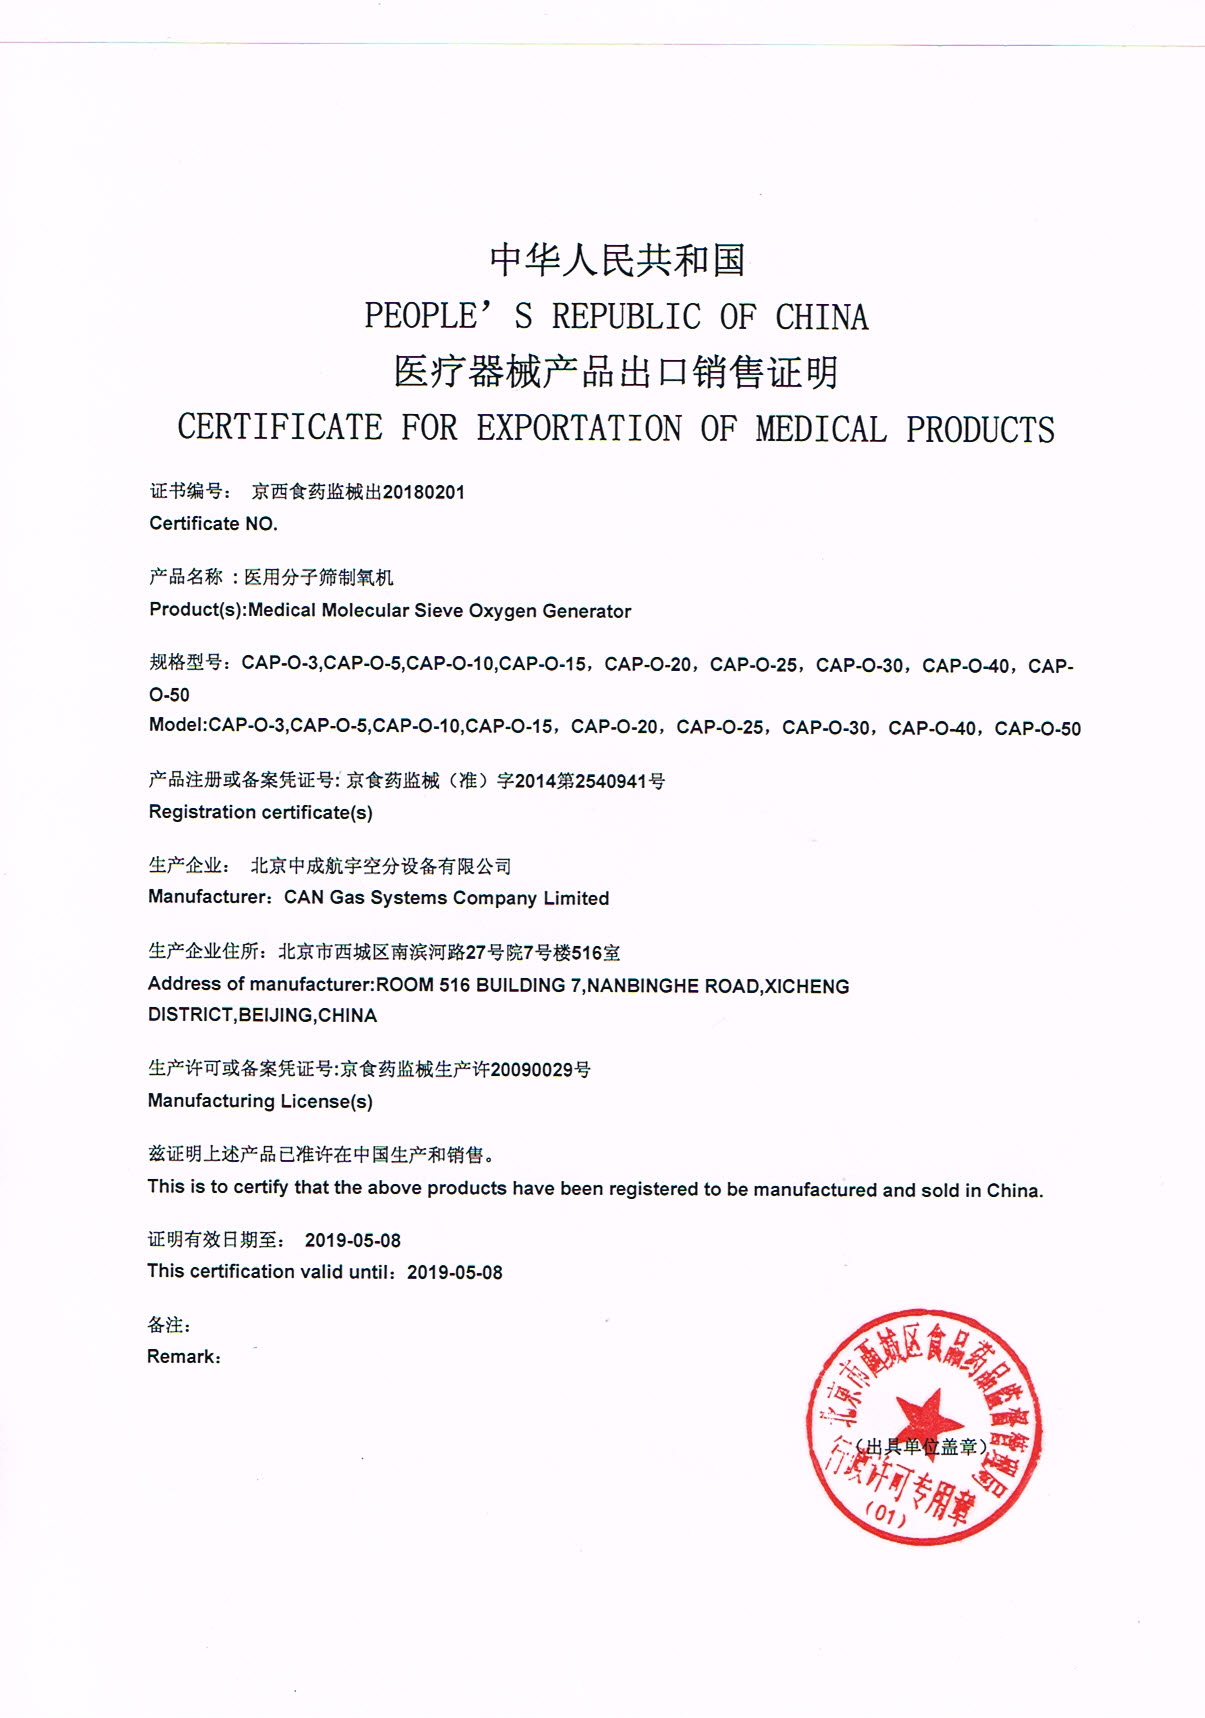 Government Certificate for Exportation of Medical Product